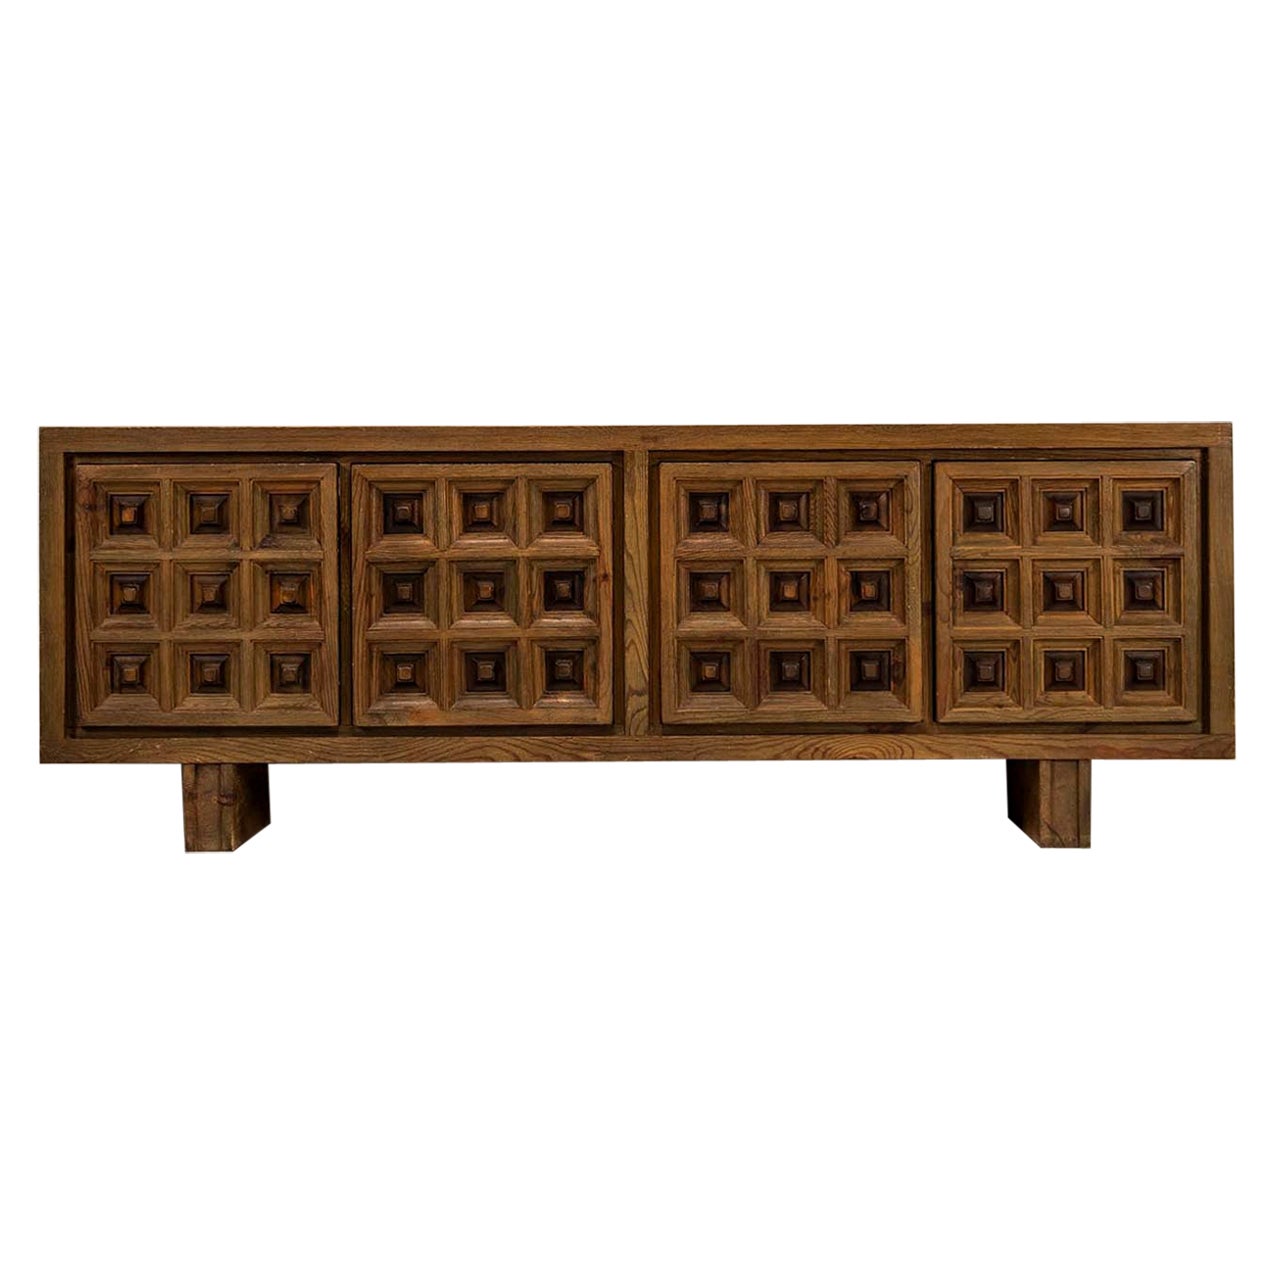 Biosca Sideboard in Stained Pine, Spain 1960s For Sale